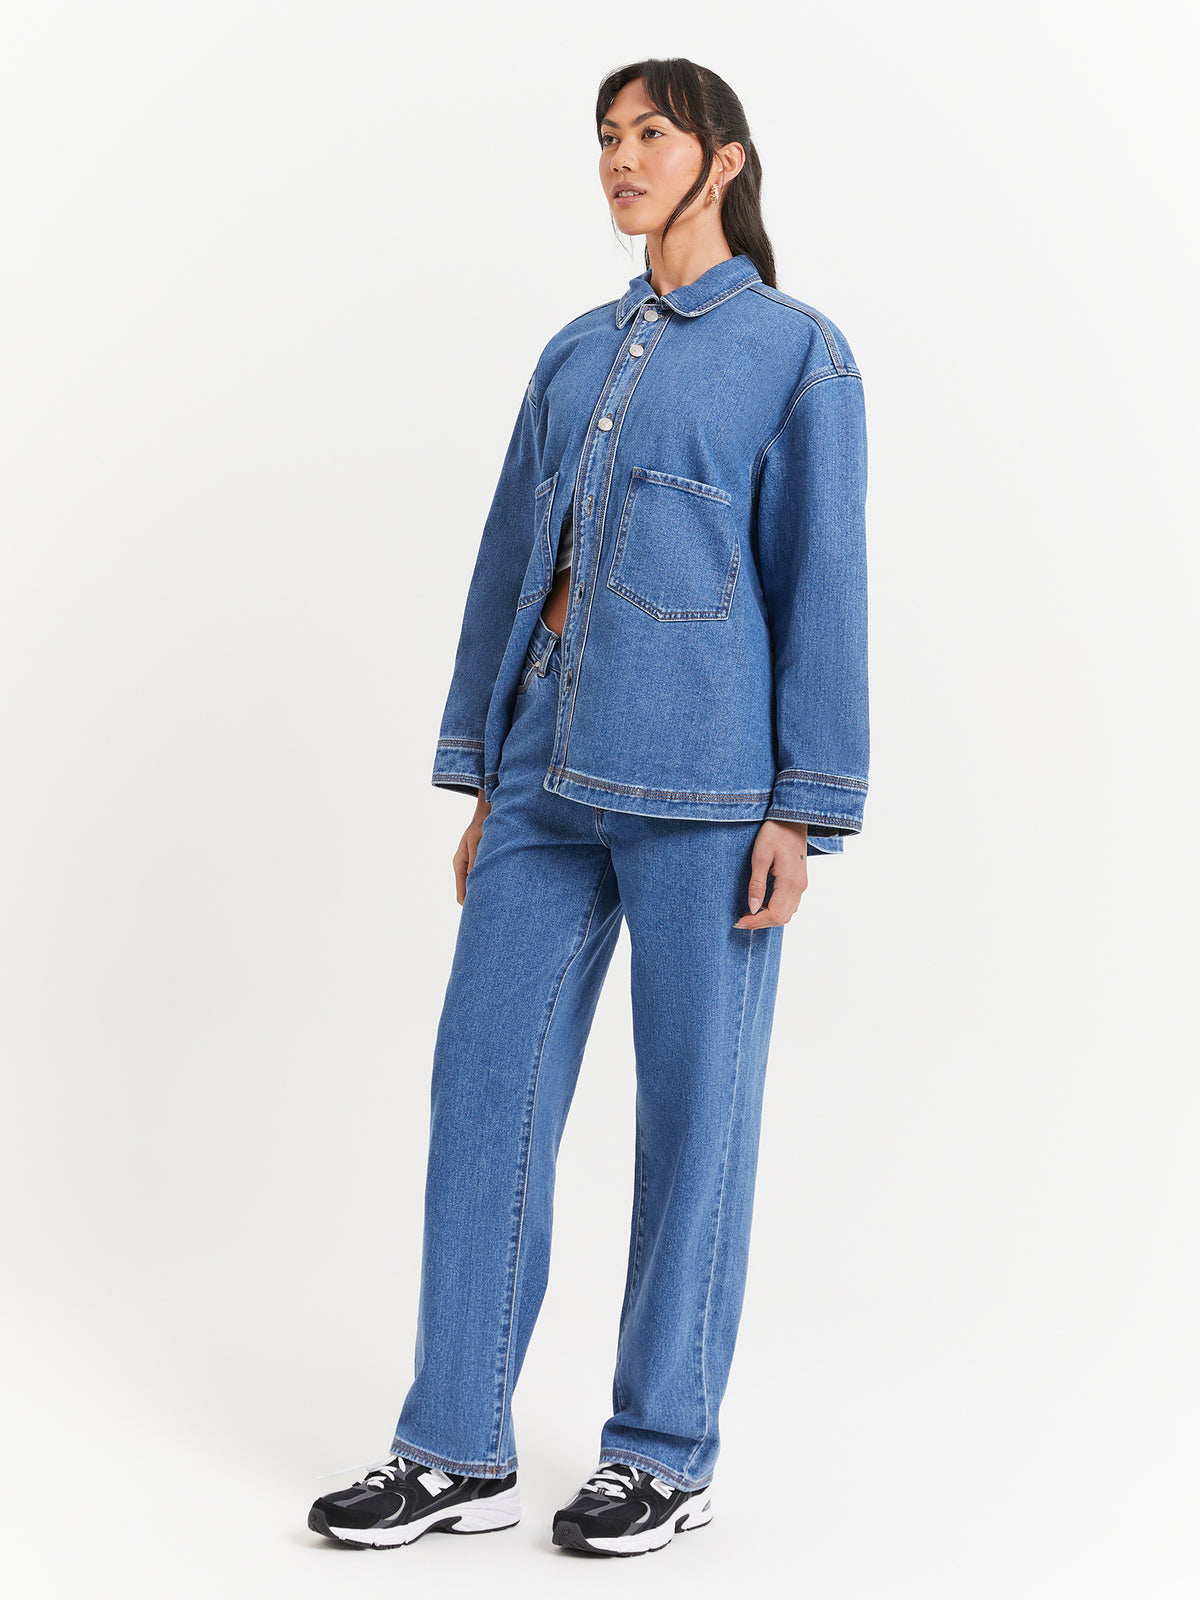 Hailey V Front Jeans in River Blue